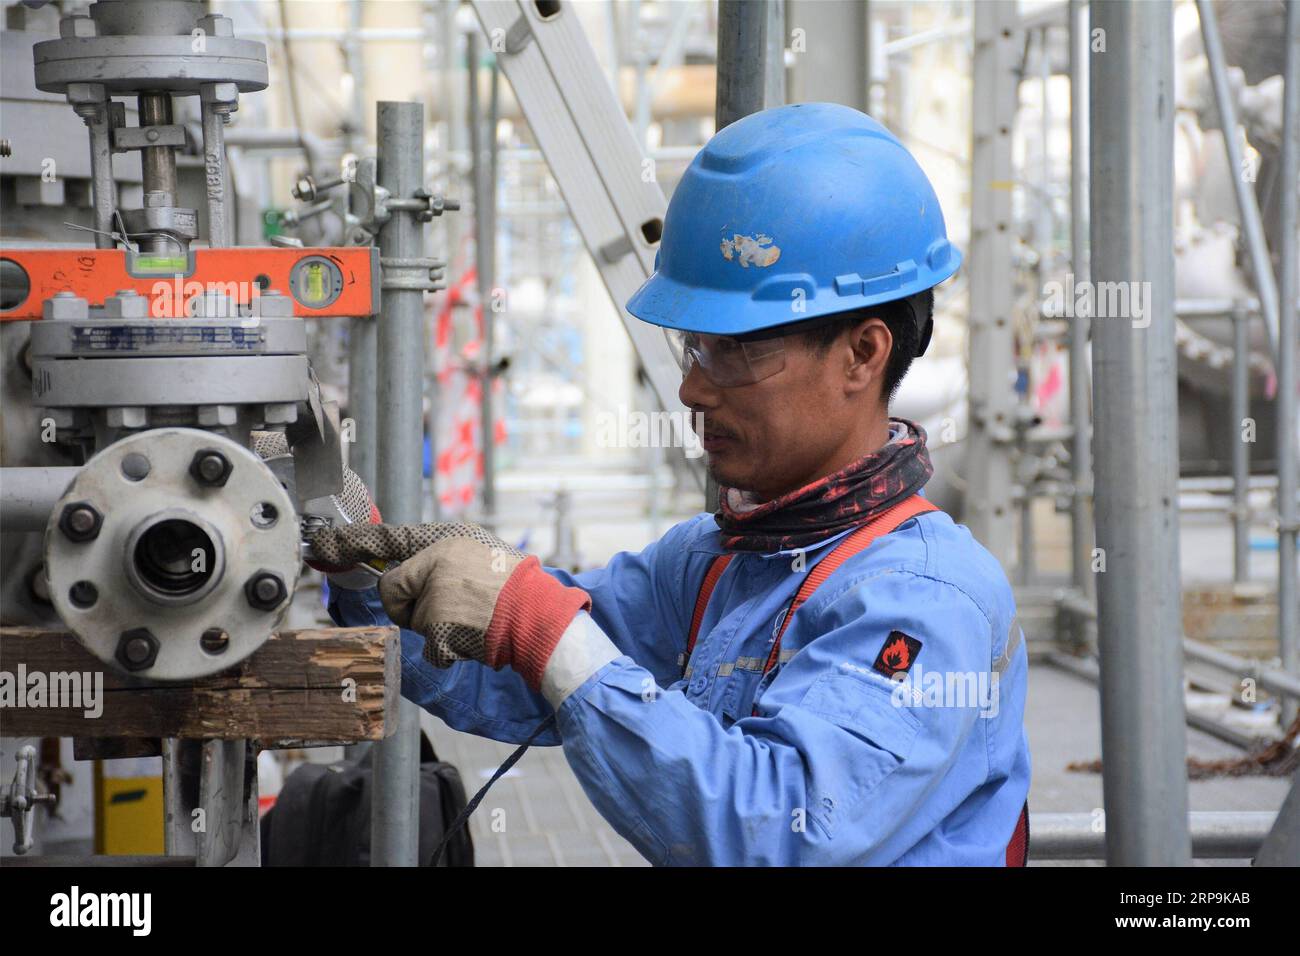 (190410) -- AL AHMADI GOVERNORATE, April 10, 2019 -- An employee of China Petrochemical Corporation (Sinopec) Fifth Construction Company works at the construction site of the Kuwait New Refinery Project in Al Ahmadi Governorate, Kuwait, April 7, 2019. TO GO WITH Feature: Chinese oil refiner builds Chinese brand in Kuwait Li Jinxue) KUWAIT-AL AHMADI GOVERNORATE-REFINERY PROJECT-SINOPEC NiexYunpeng PUBLICATIONxNOTxINxCHN Stock Photo